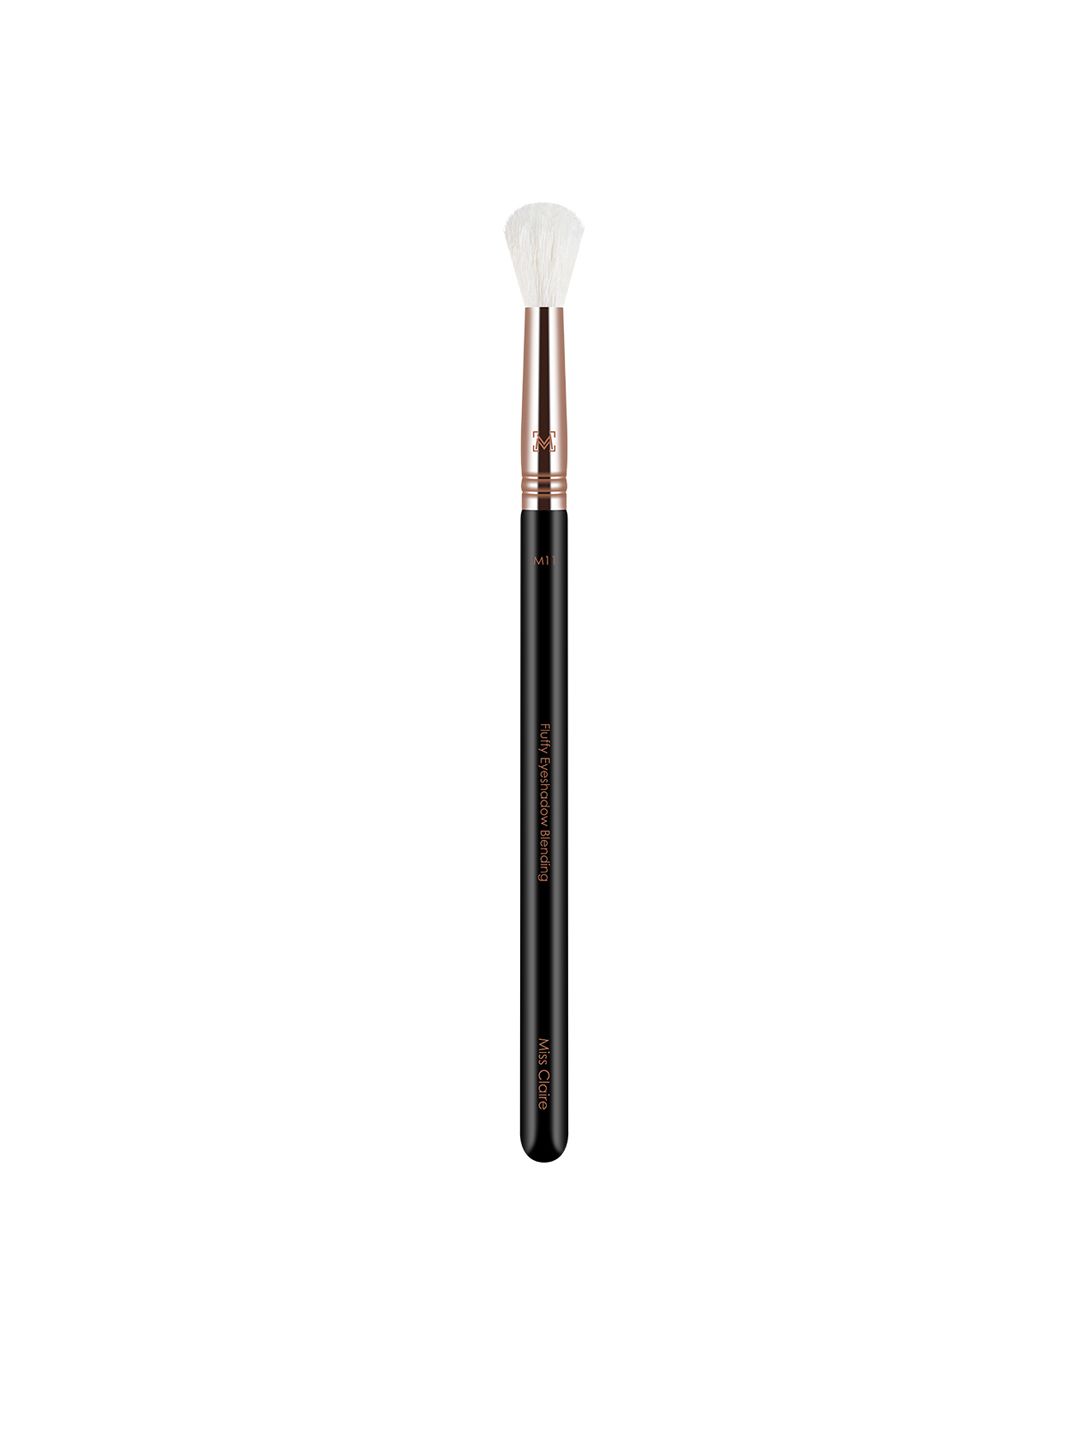 Miss Claire Fluffy Eyeshadow Blending Brush - M11 Black & Rose Gold-Toned Price in India